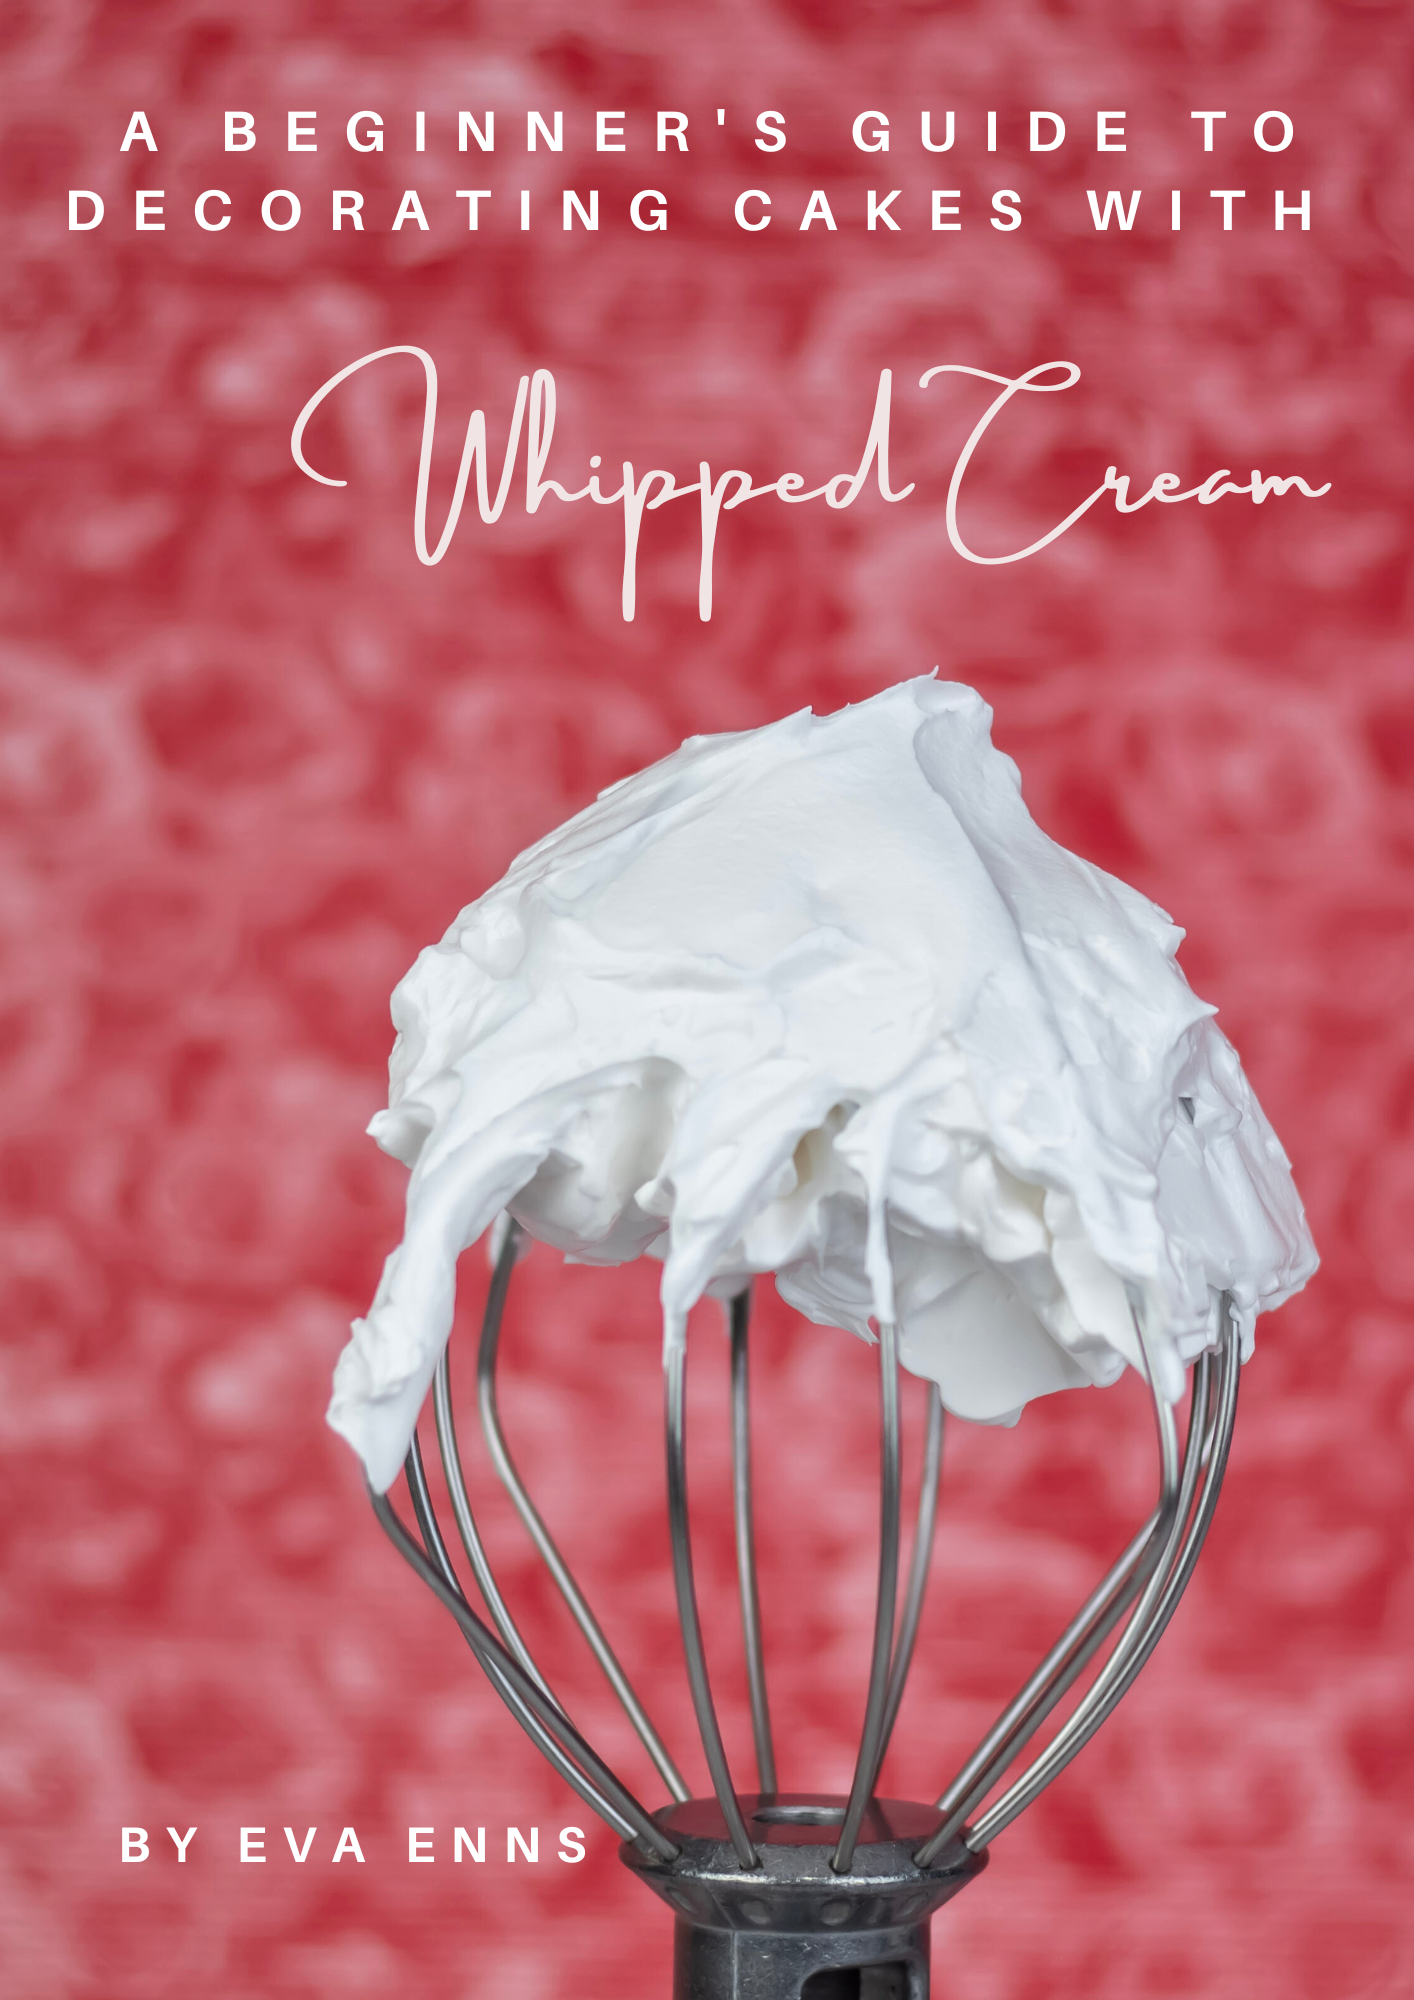 A Beginner's Guide to Decorating Cakes with whipped cream